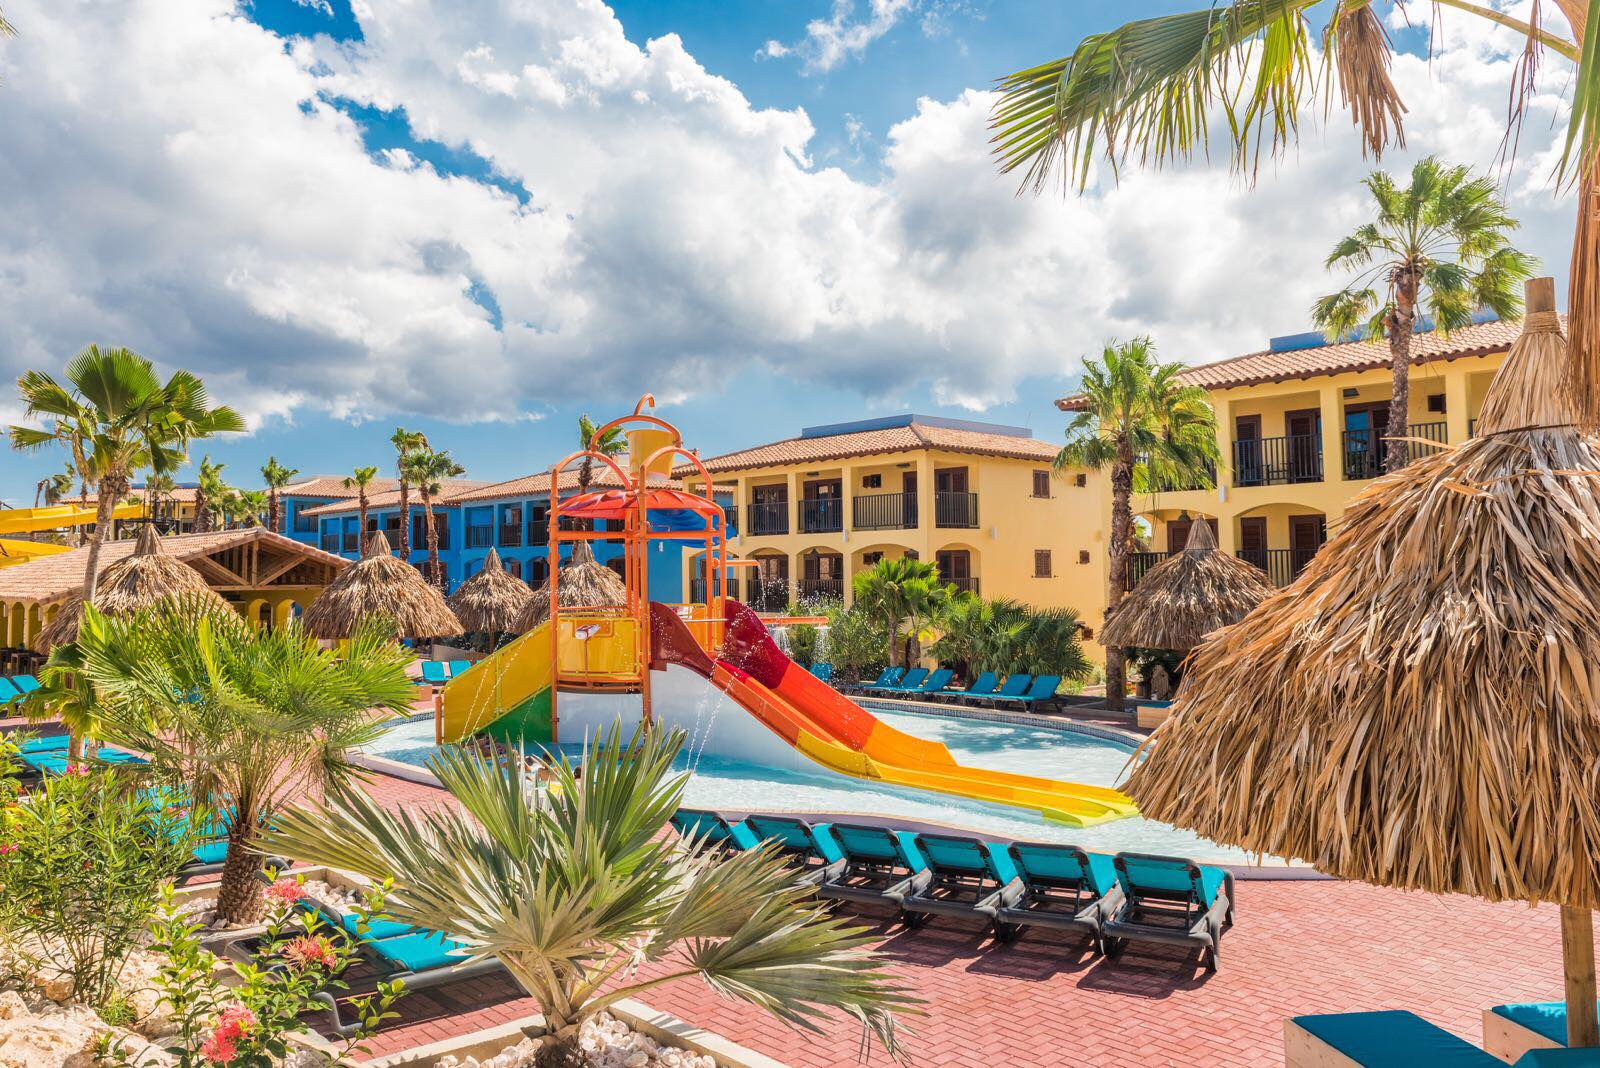 The colorful on-site playground, surrounded by resort buildings, at Kunuku Aqua Resort Curacao - Trademark by Wyndham.